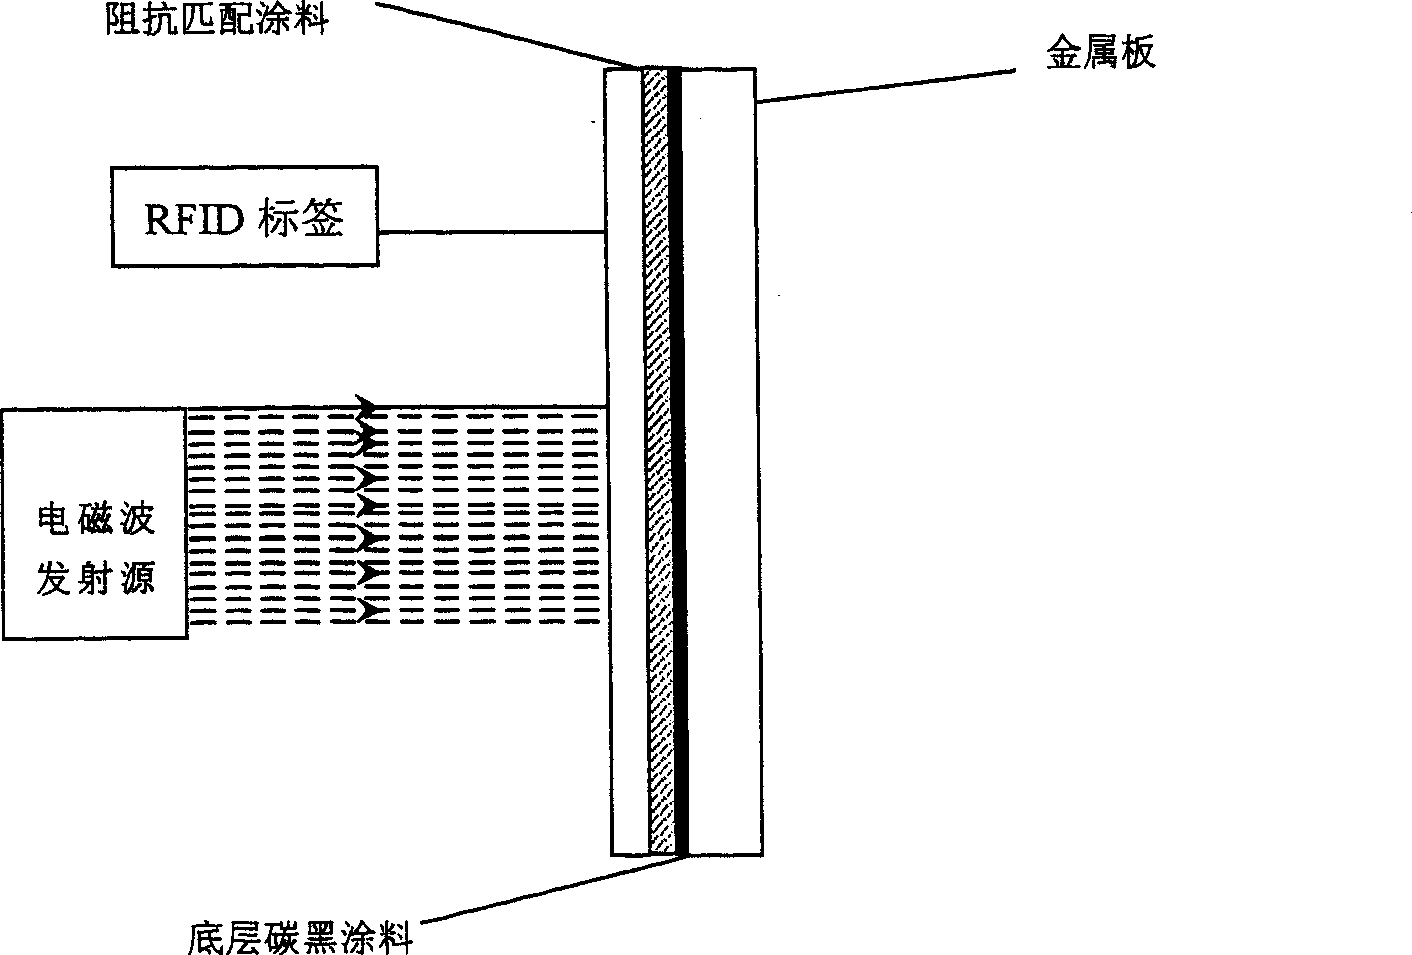 Radio frequency electromagnetic impedance match anti-electromagnetic interference composite coating, preparation and spray coating method